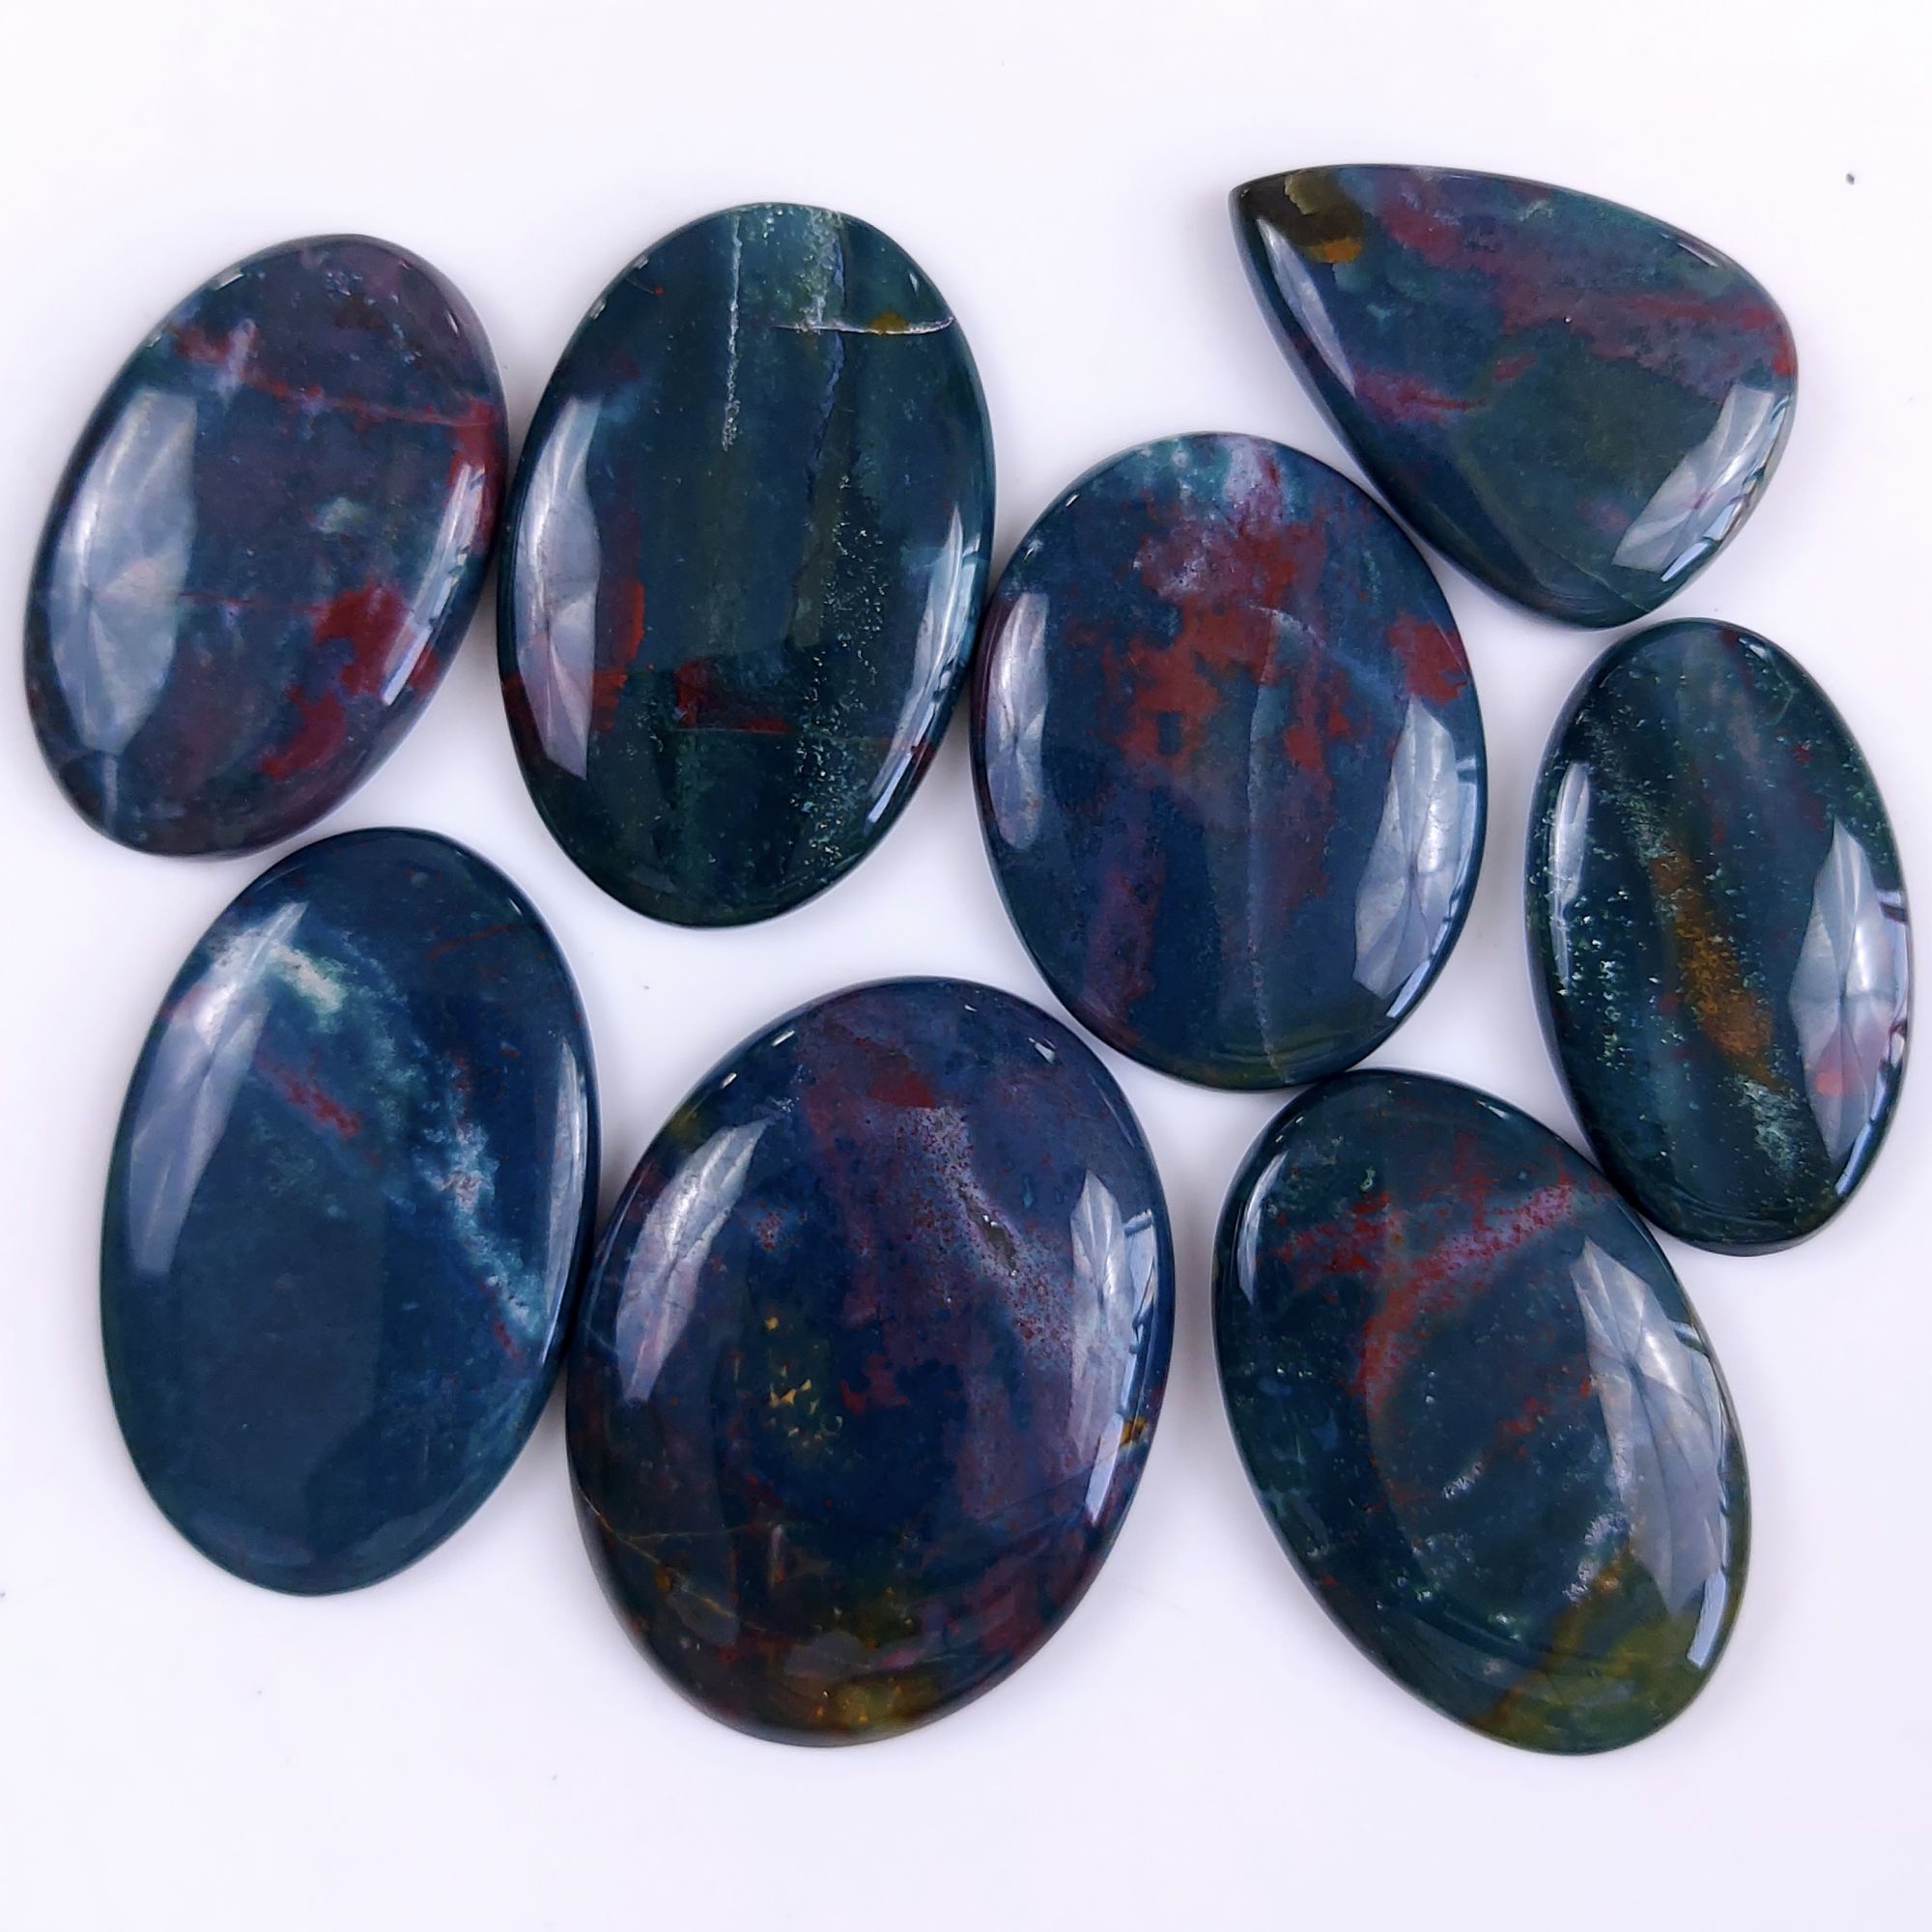 8Pcs 488Cts  Natural Green Blood Stone Loose Cabochon Gemstone Lot For Jewelry Making Gift For Her 45x30 37x22mm#900